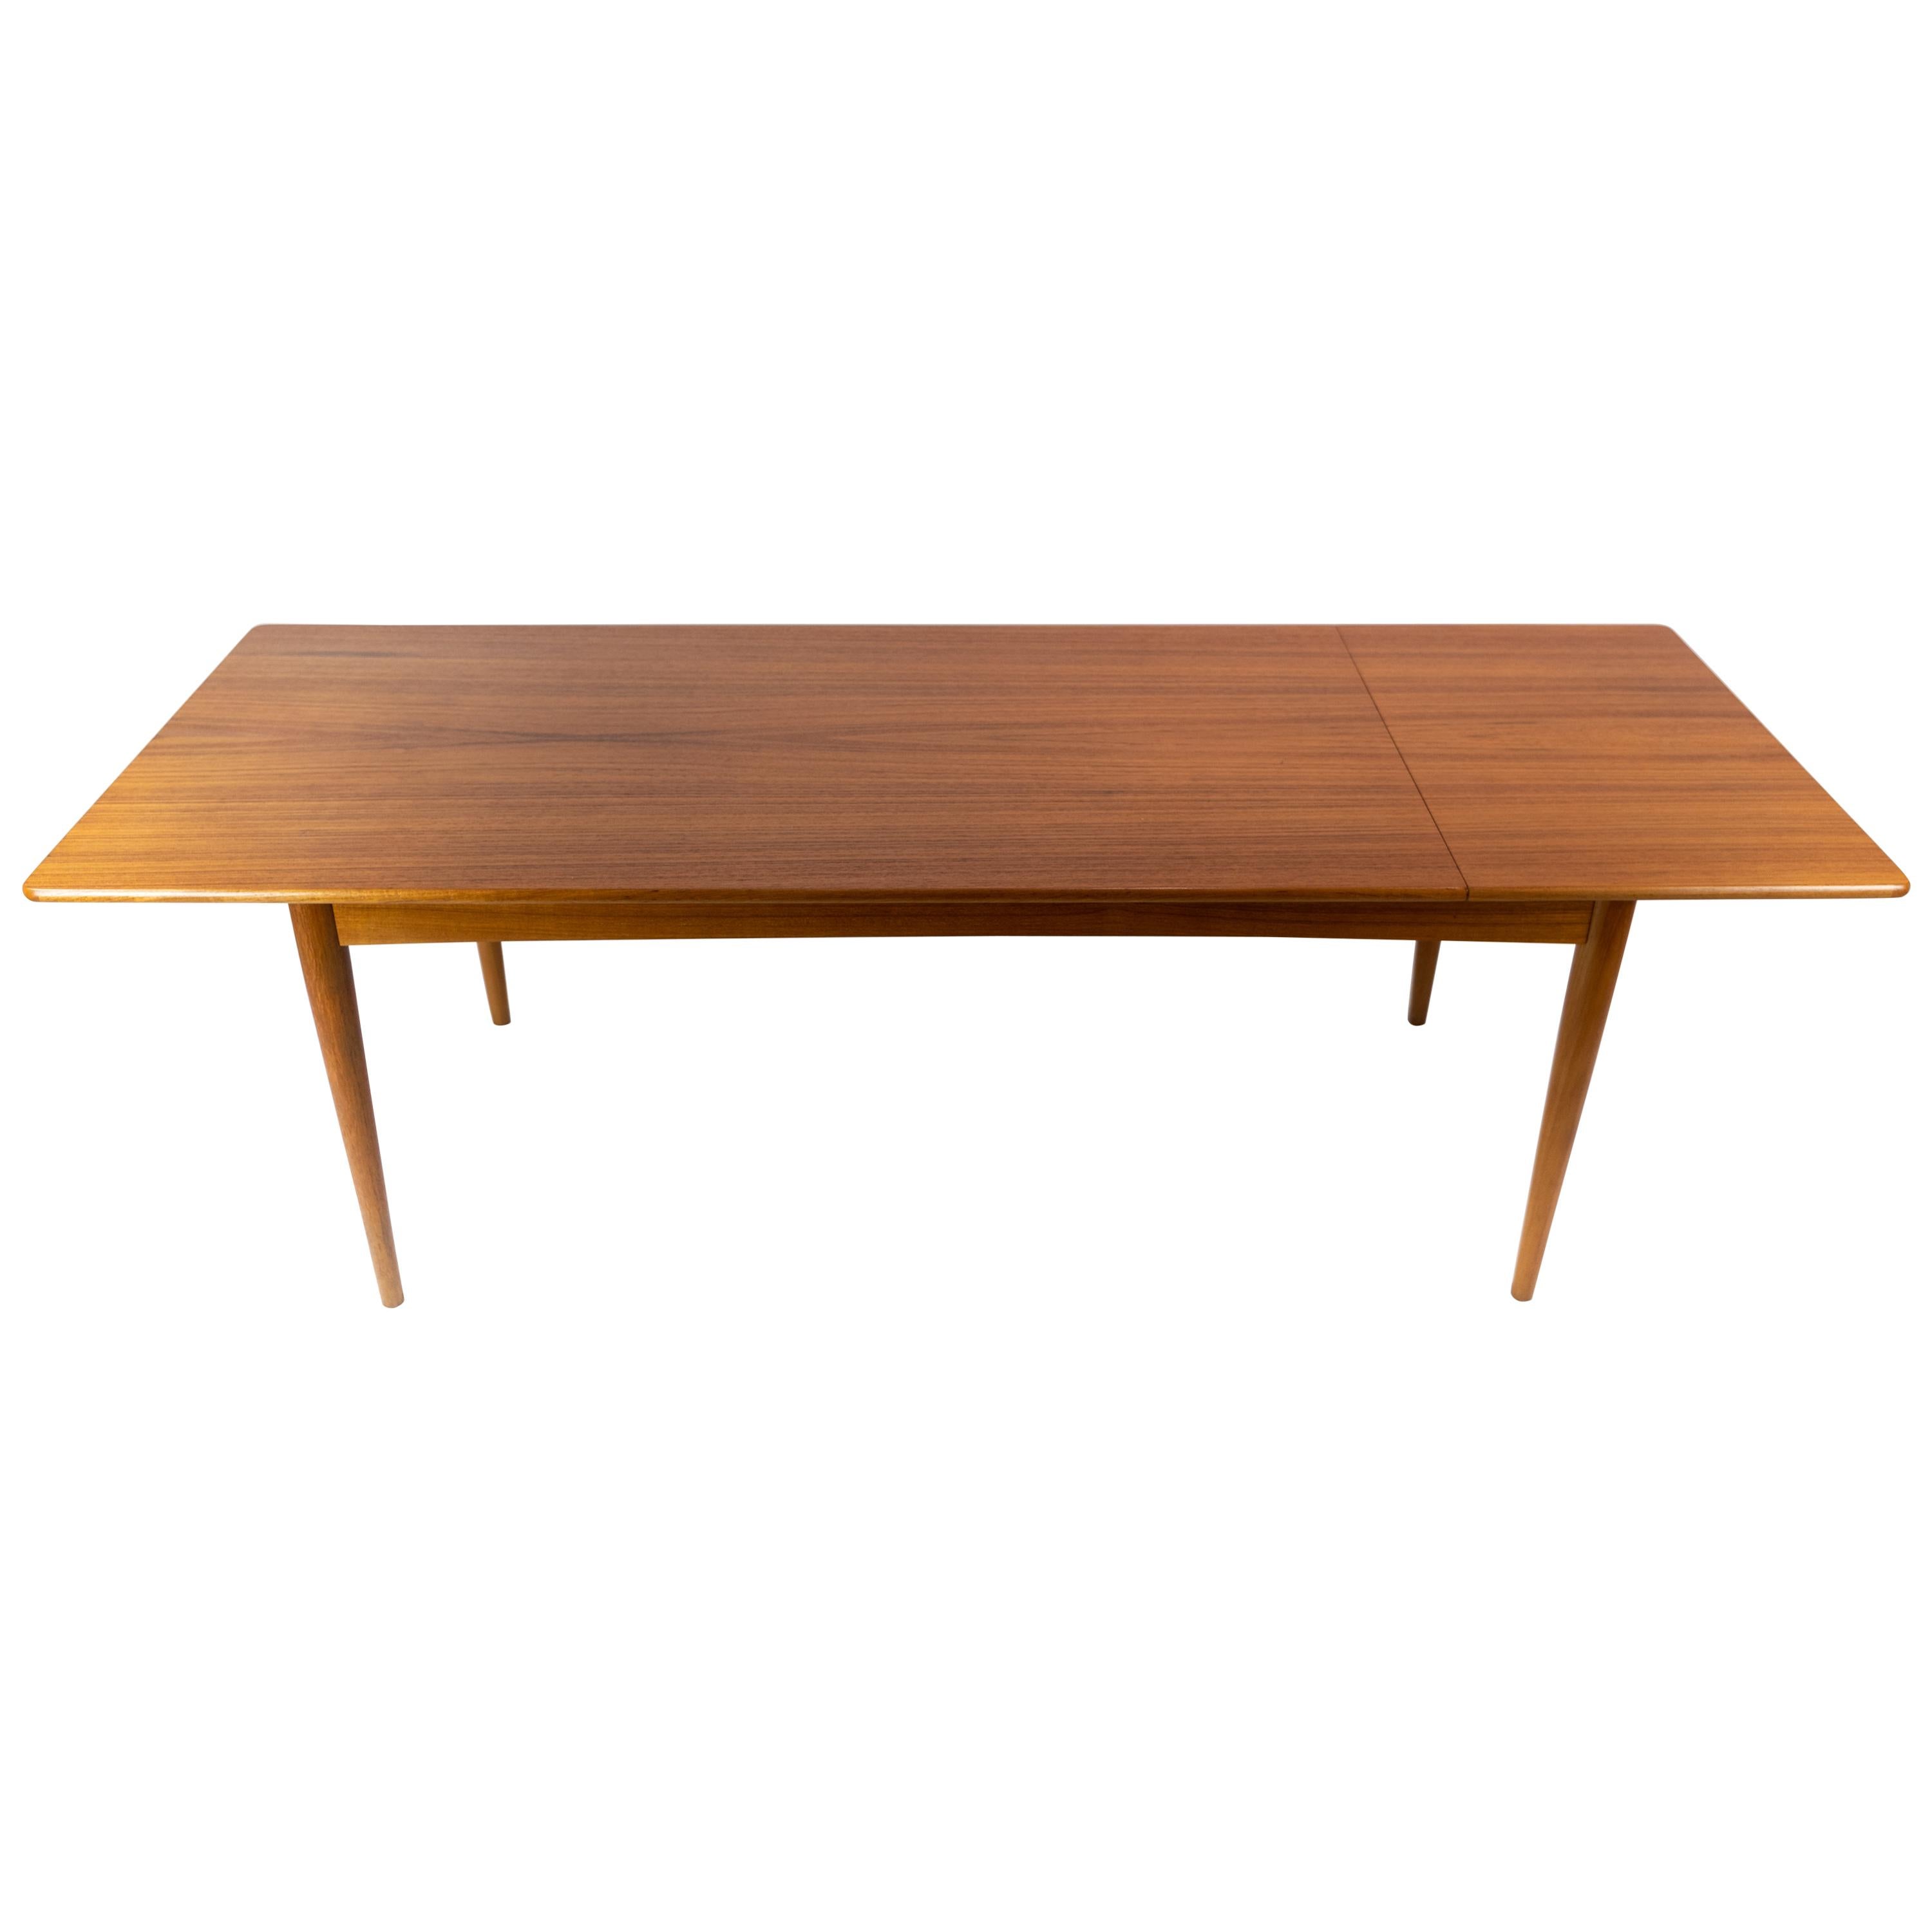 Coffee Table with Extension Leaf in Teak of Danish Design from the 1960s